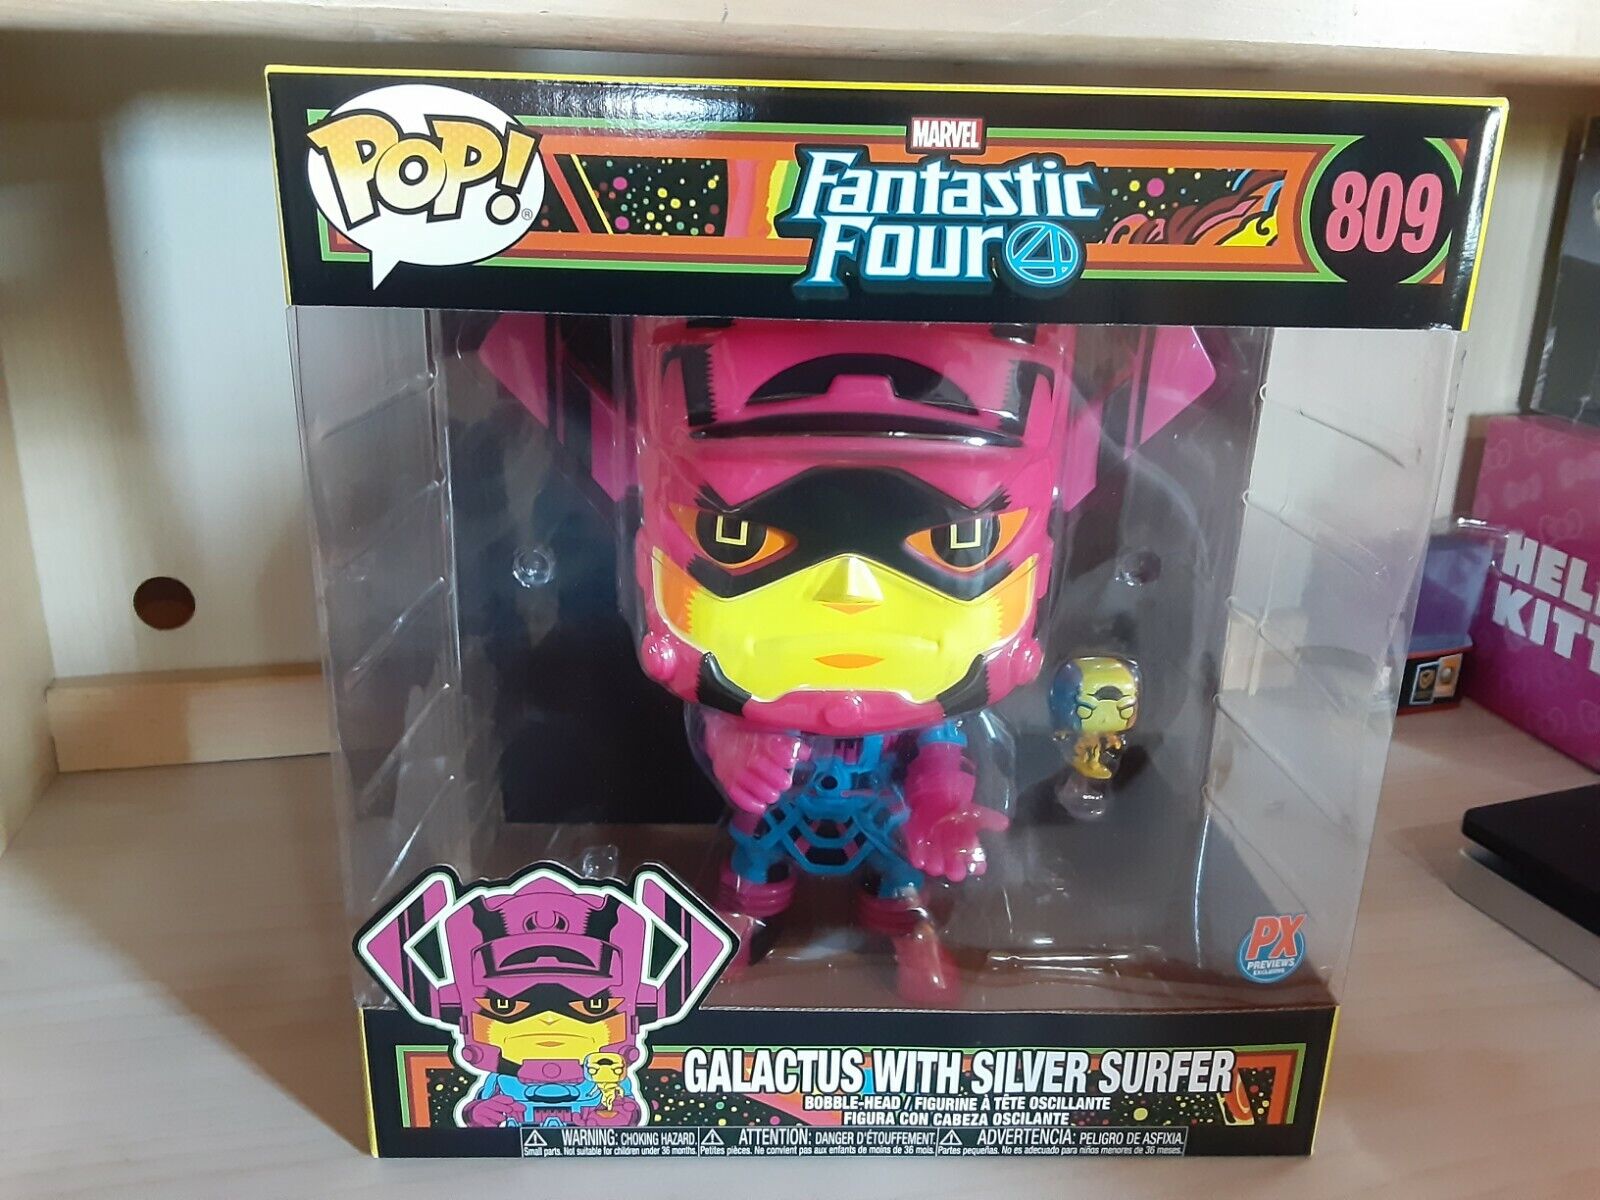 Marvel Funko Pop Galactus with Silver Surfer #809 Black Light Neon PX 10 Inch